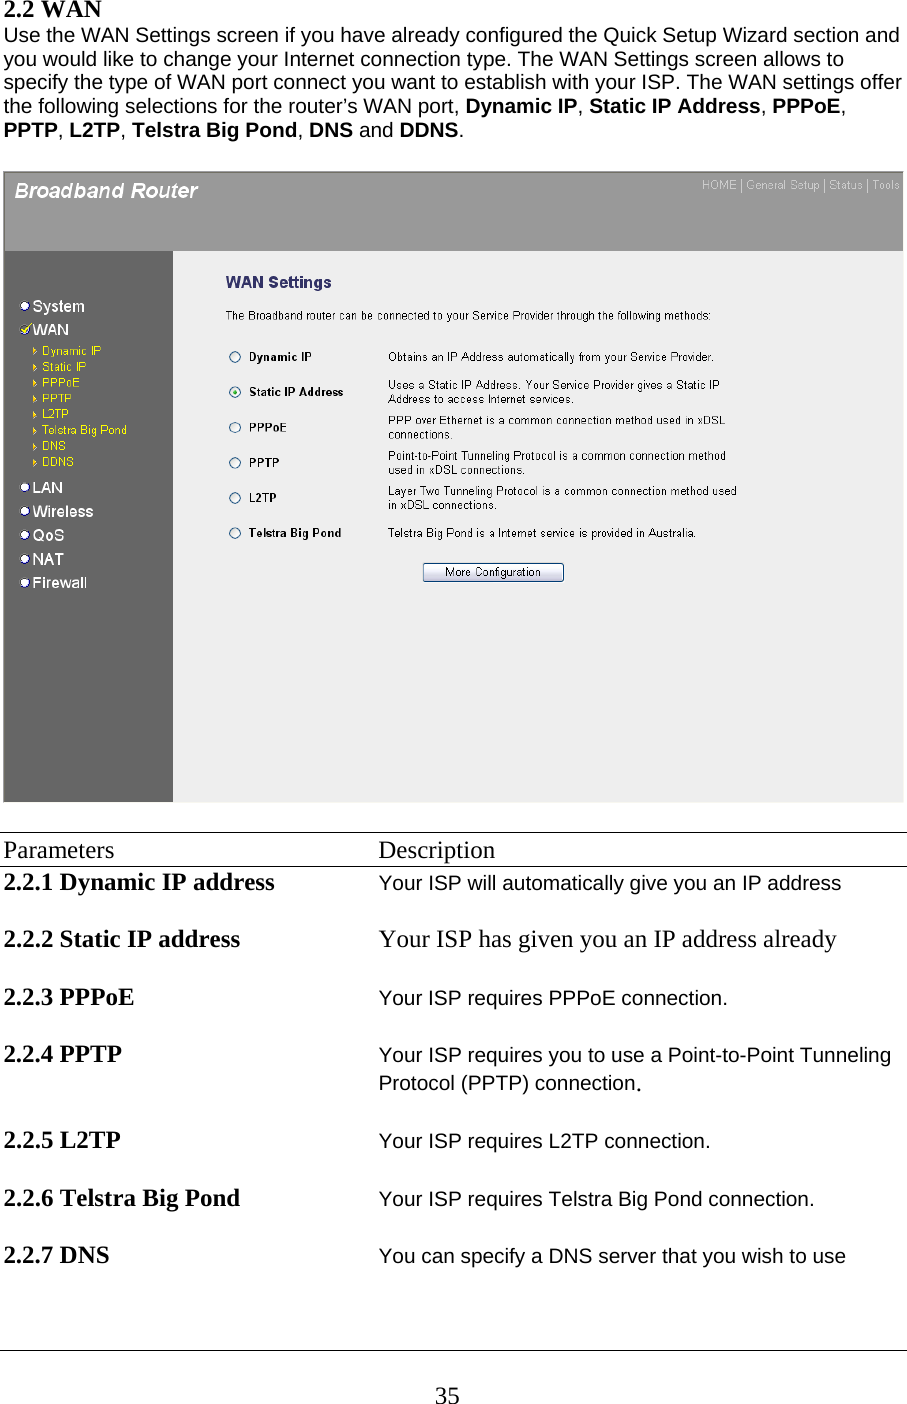 2.2 WAN  Use the WAN Settings screen if you have already configured the Quick Setup Wizard section and you would like to change your Internet connection type. The WAN Settings screen allows to specify the type of WAN port connect you want to establish with your ISP. The WAN settings offer the following selections for the router’s WAN port, Dynamic IP, Static IP Address, PPPoE, PPTP, L2TP, Telstra Big Pond, DNS and DDNS.    Parameters    Description 2.2.1 Dynamic IP address   Your ISP will automatically give you an IP address  2.2.2 Static IP address  Your ISP has given you an IP address already   2.2.3 PPPoE Your ISP requires PPPoE connection.  2.2.4 PPTP Your ISP requires you to use a Point-to-Point Tunneling Protocol (PPTP) connection.   2.2.5 L2TP    Your ISP requires L2TP connection.  2.2.6 Telstra Big Pond    Your ISP requires Telstra Big Pond connection.  2.2.7 DNS    You can specify a DNS server that you wish to use   35